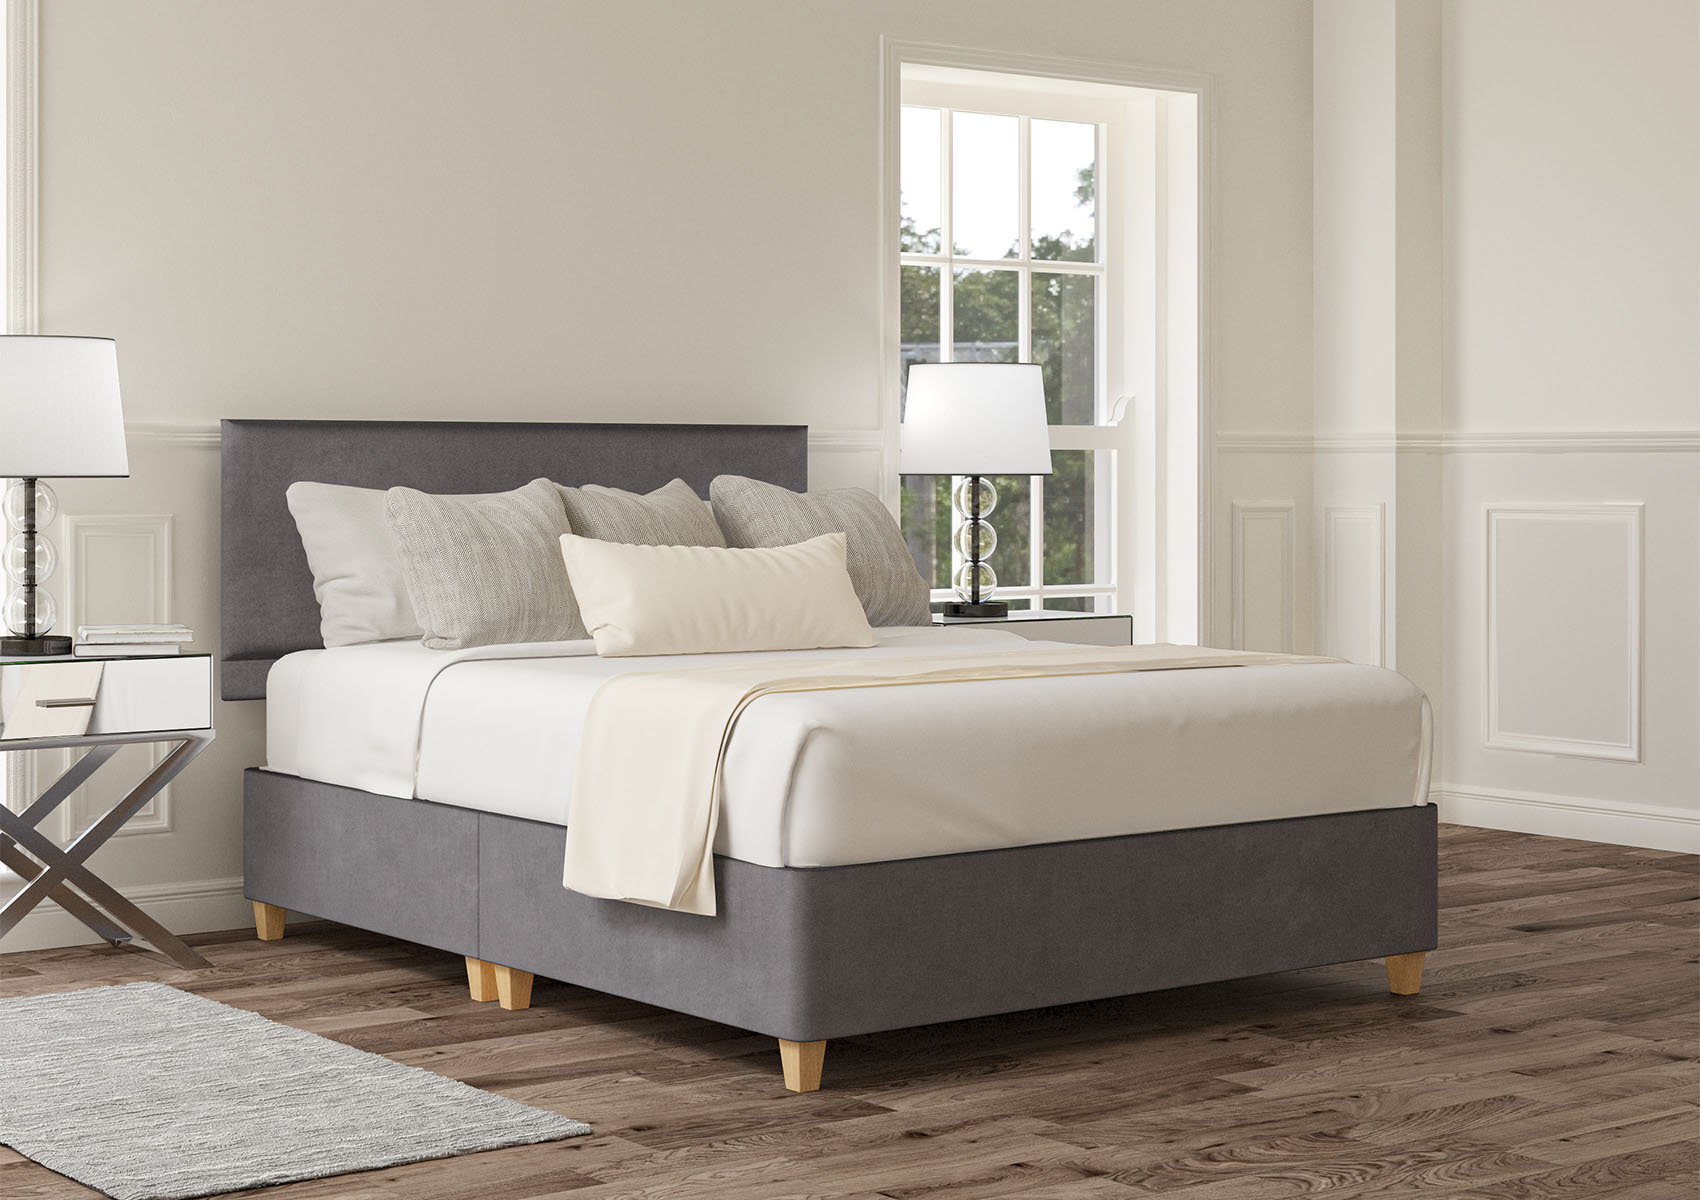 View Henley Plush Steel Upholstered Double Bed Time4Sleep information